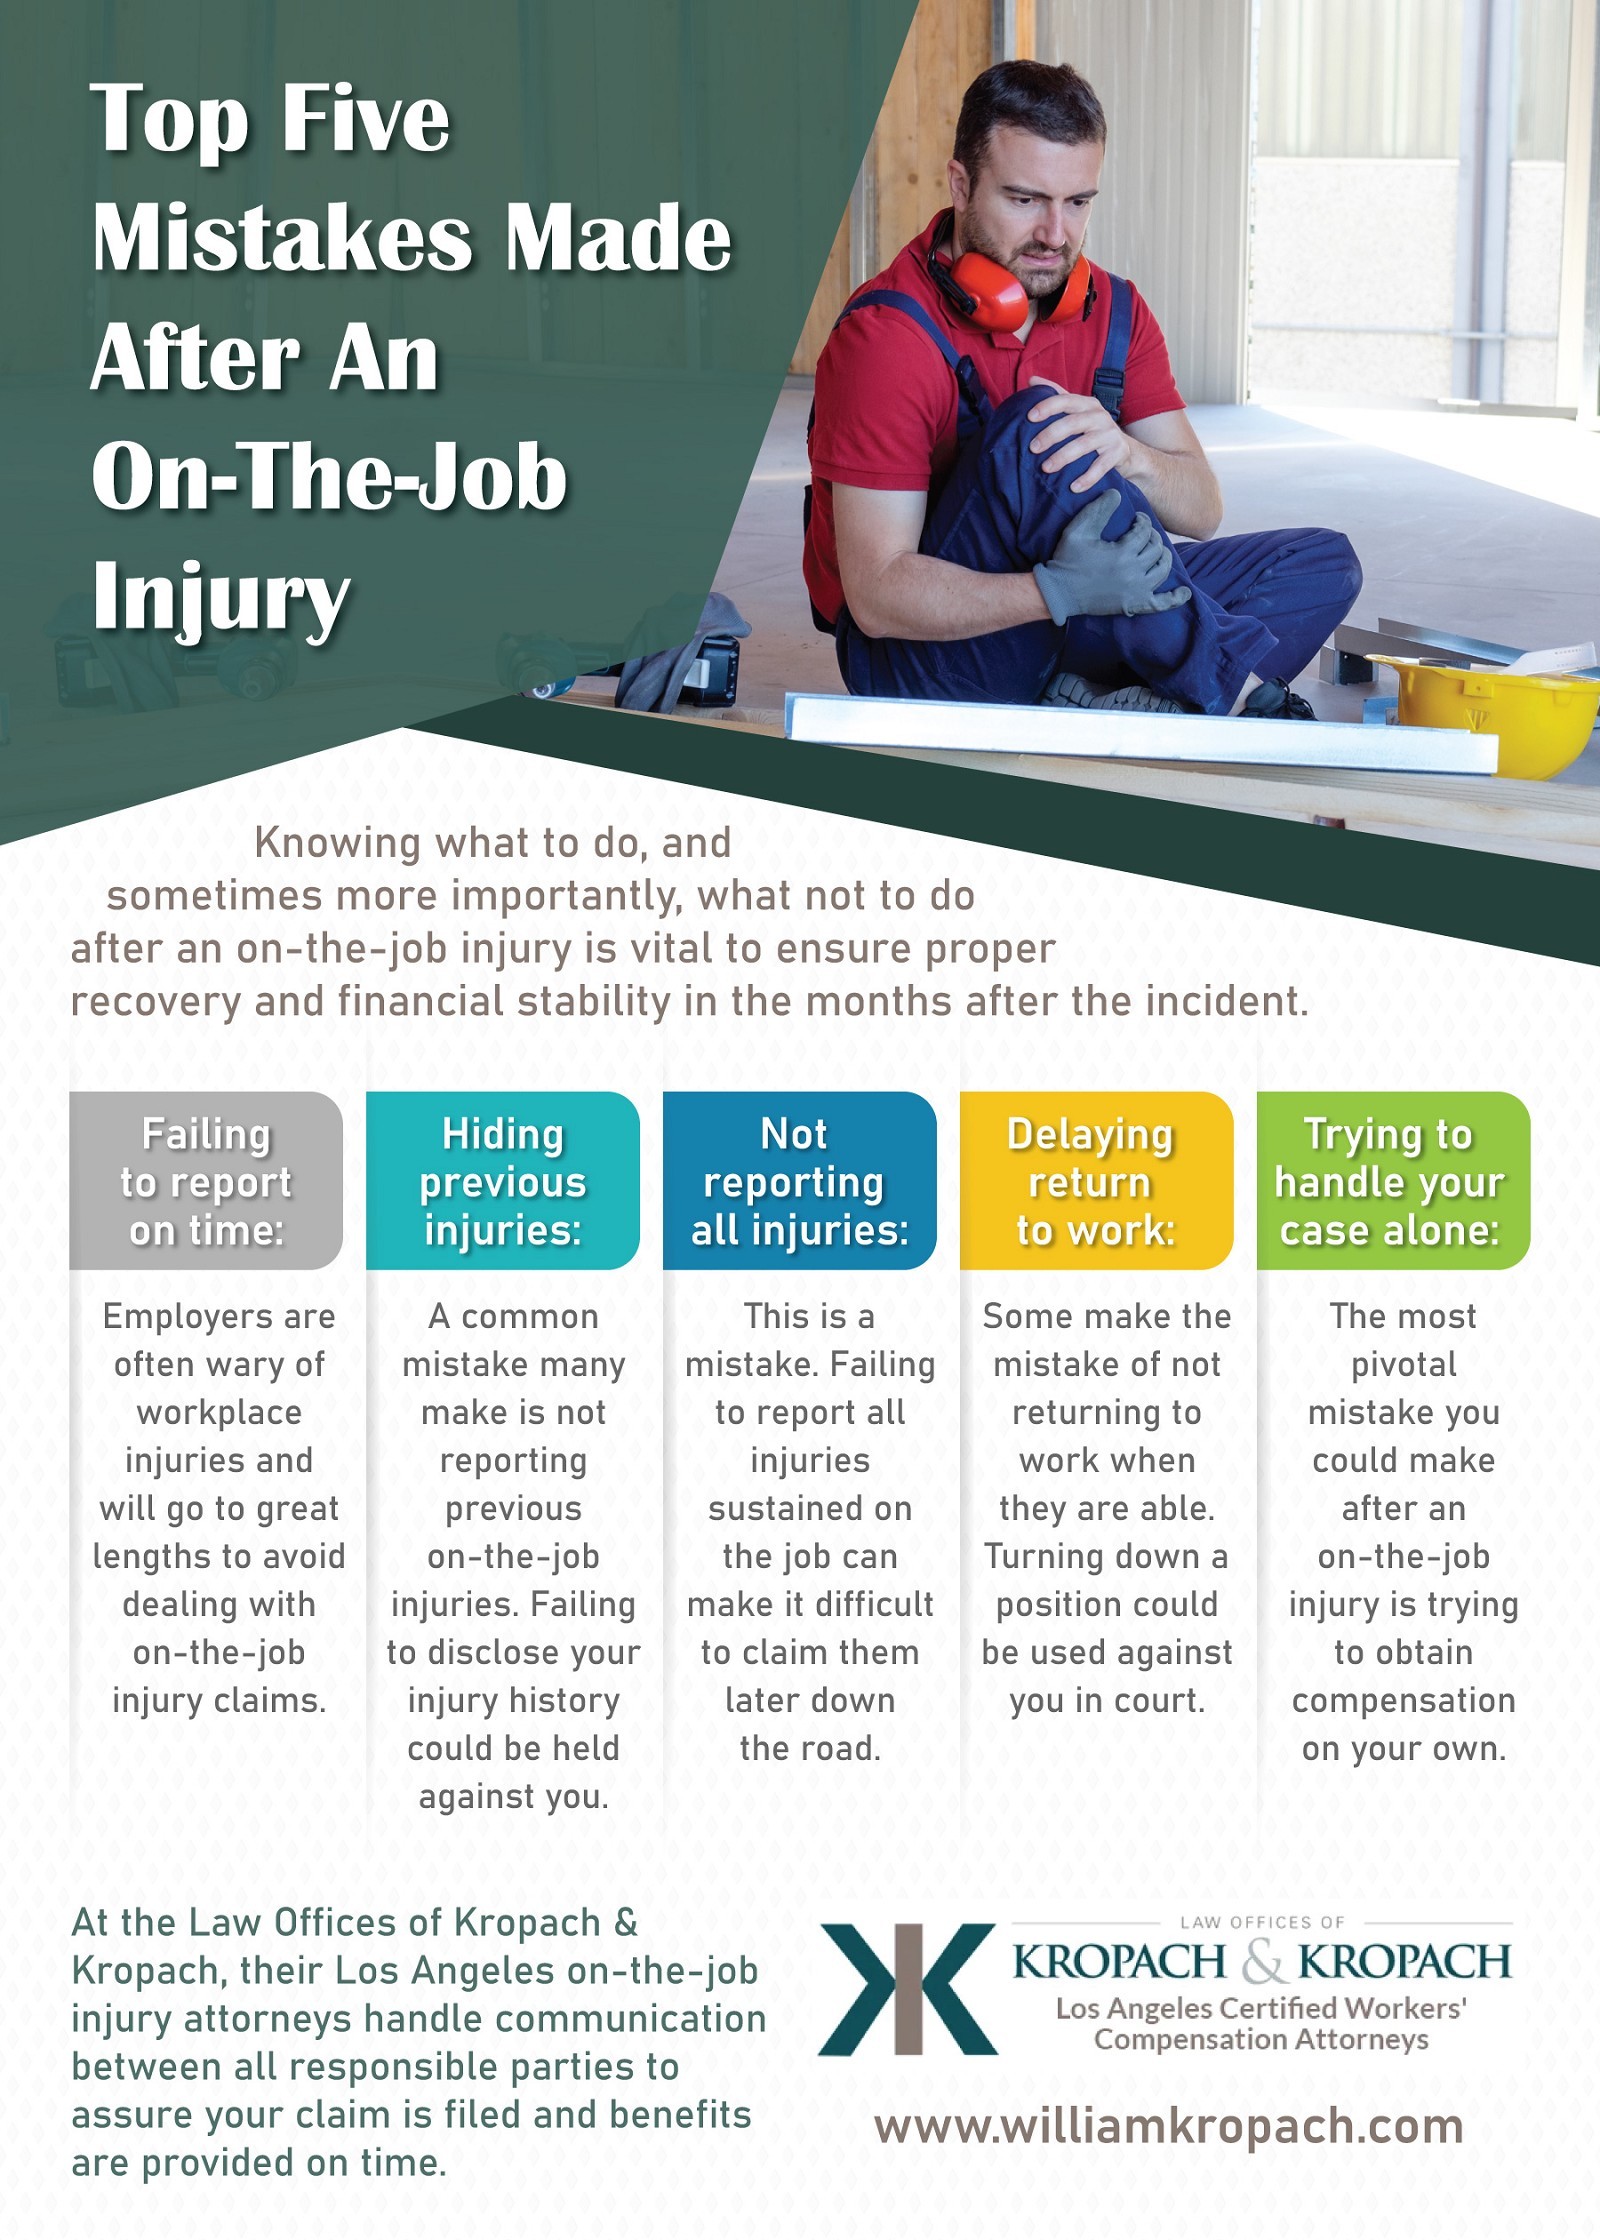 Top Five Mistakes Made After An On-The-Job Injury